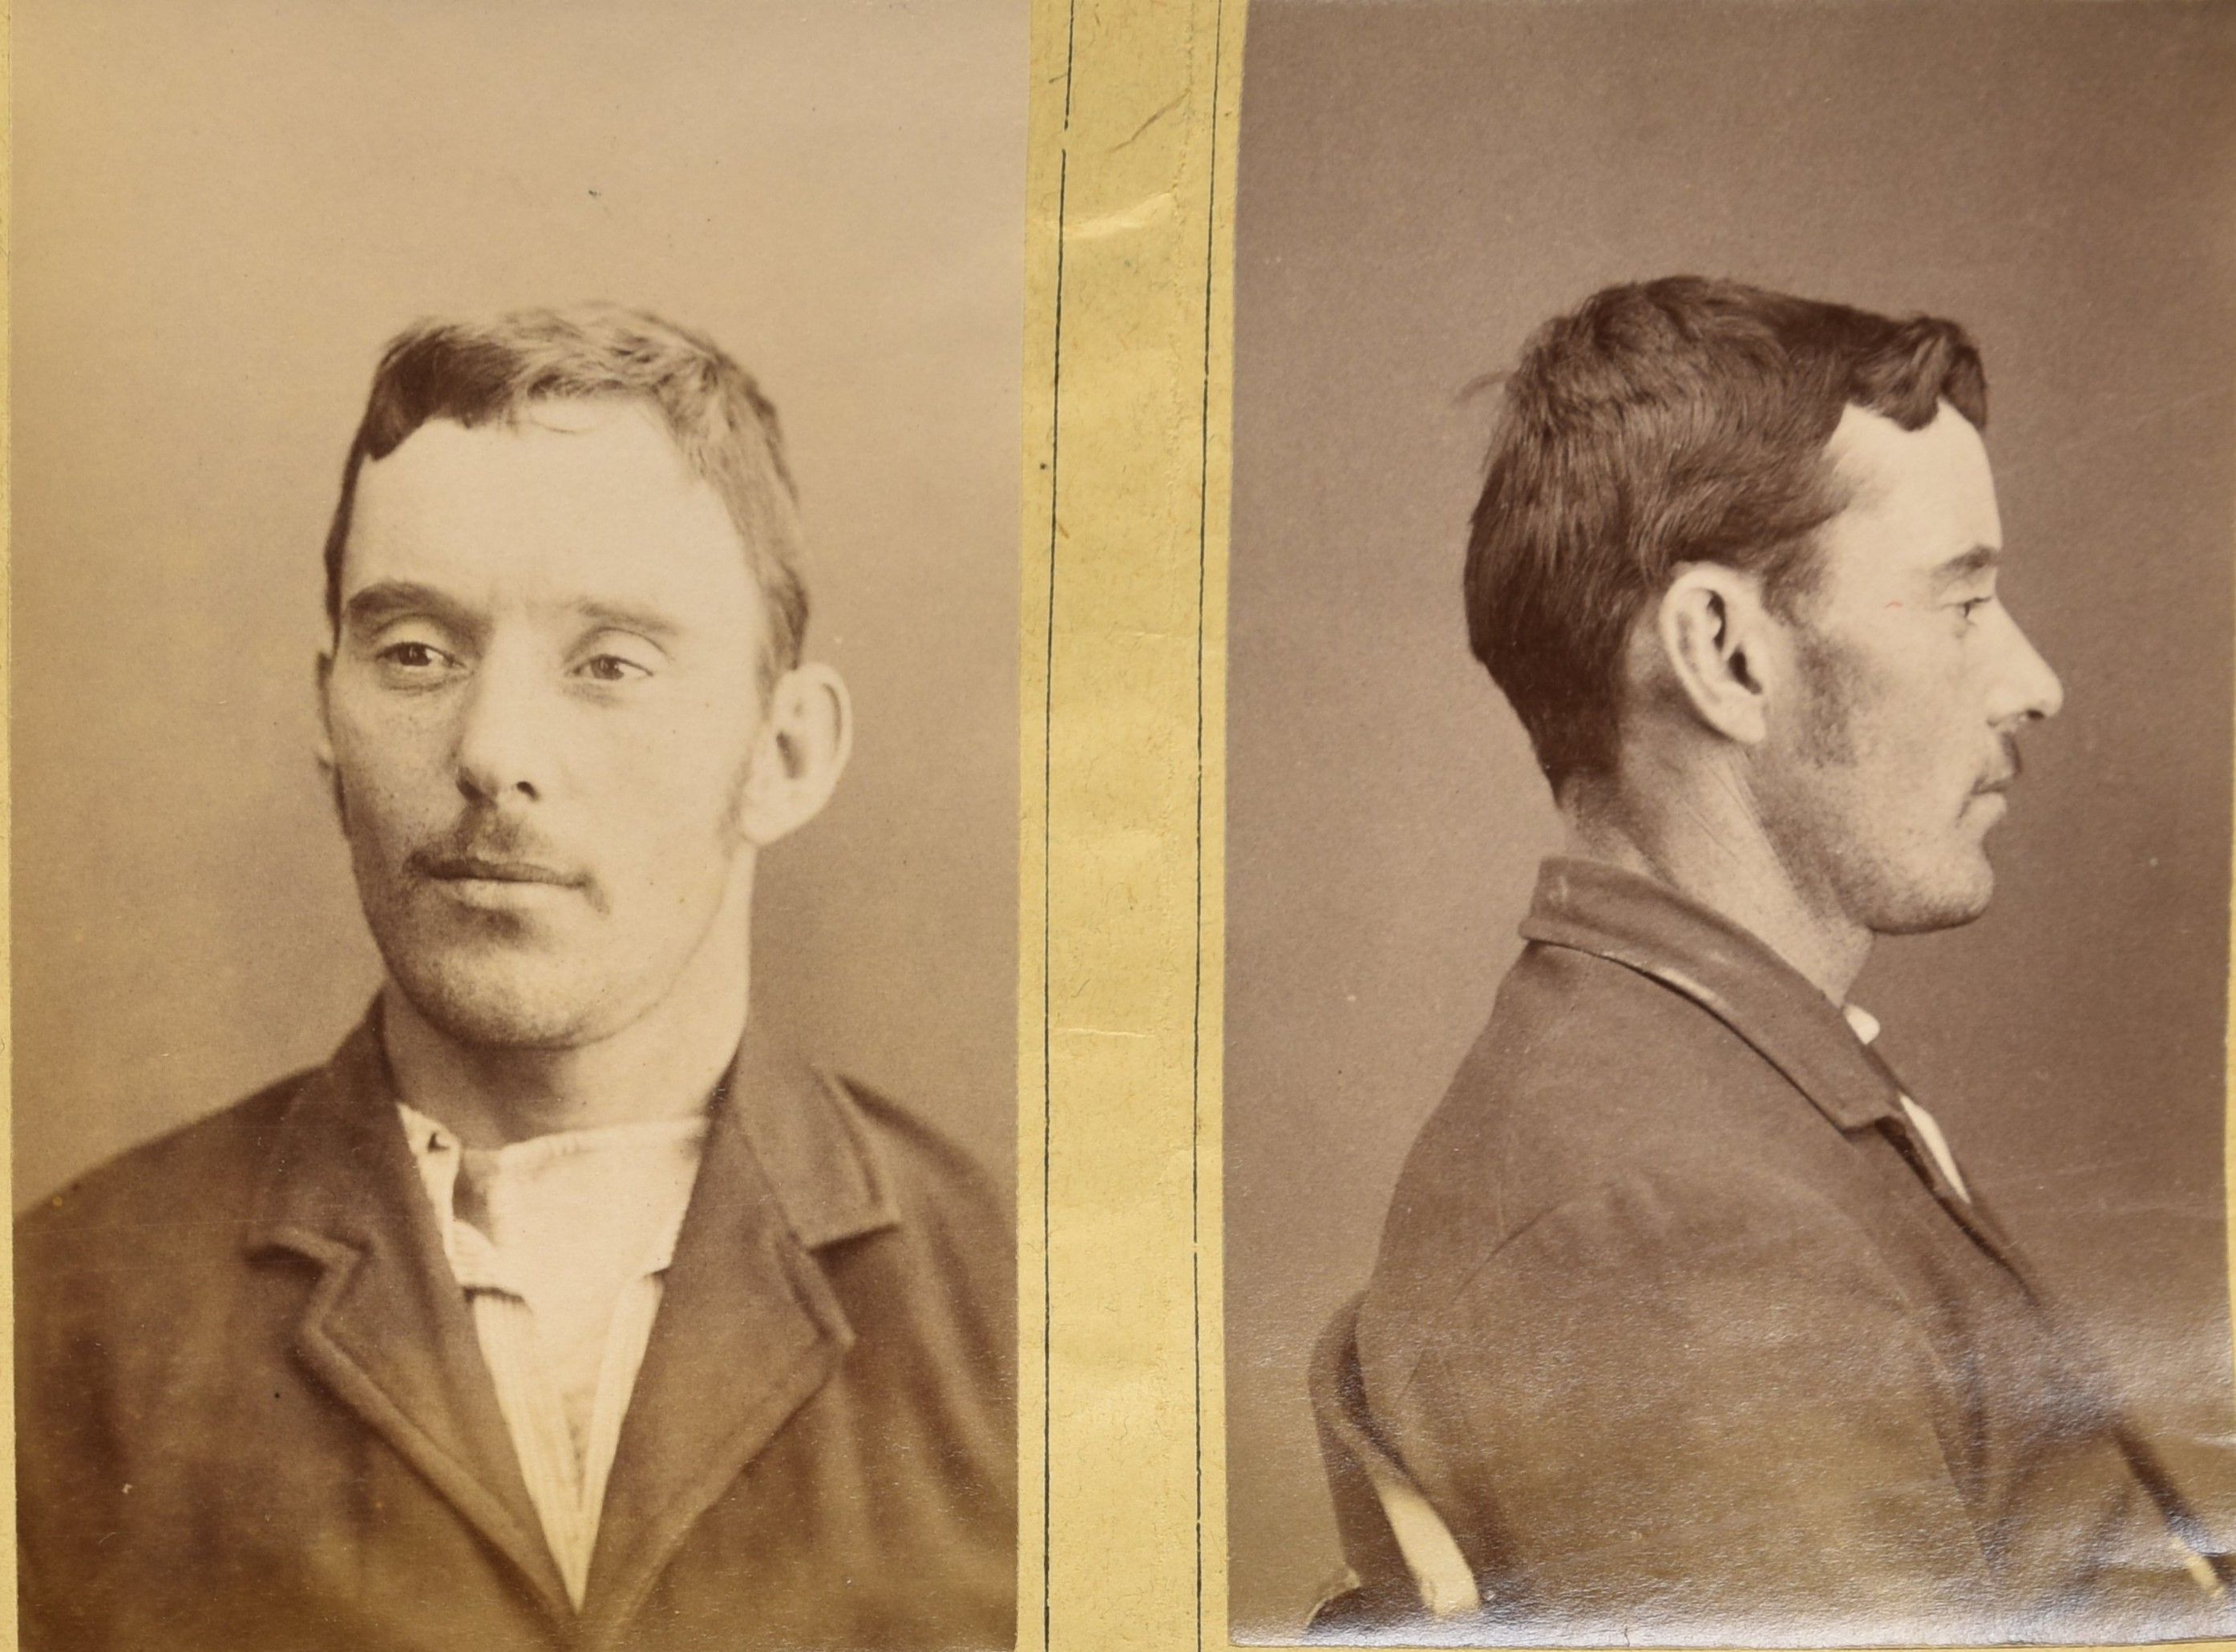 Two photos of the one man, one front facing and one in side profile